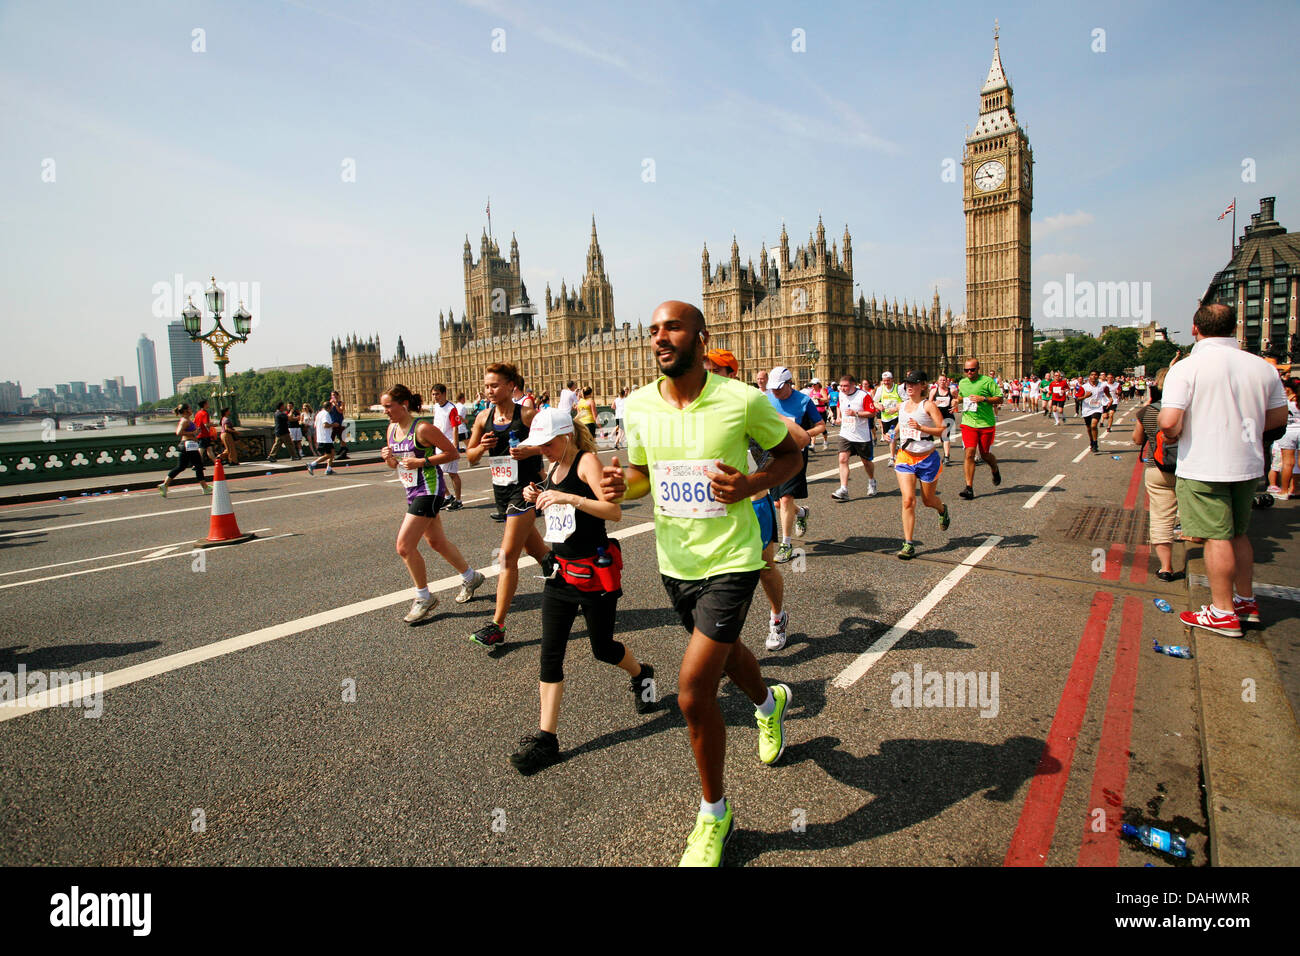 London, UK. 14th July, 2013. Runners in UK 10km fun run. The British 10k London run, 13th year, about 25,000 runners from all over the world joined. Credit:  SUNG KUK KIM/Alamy Live News Stock Photo